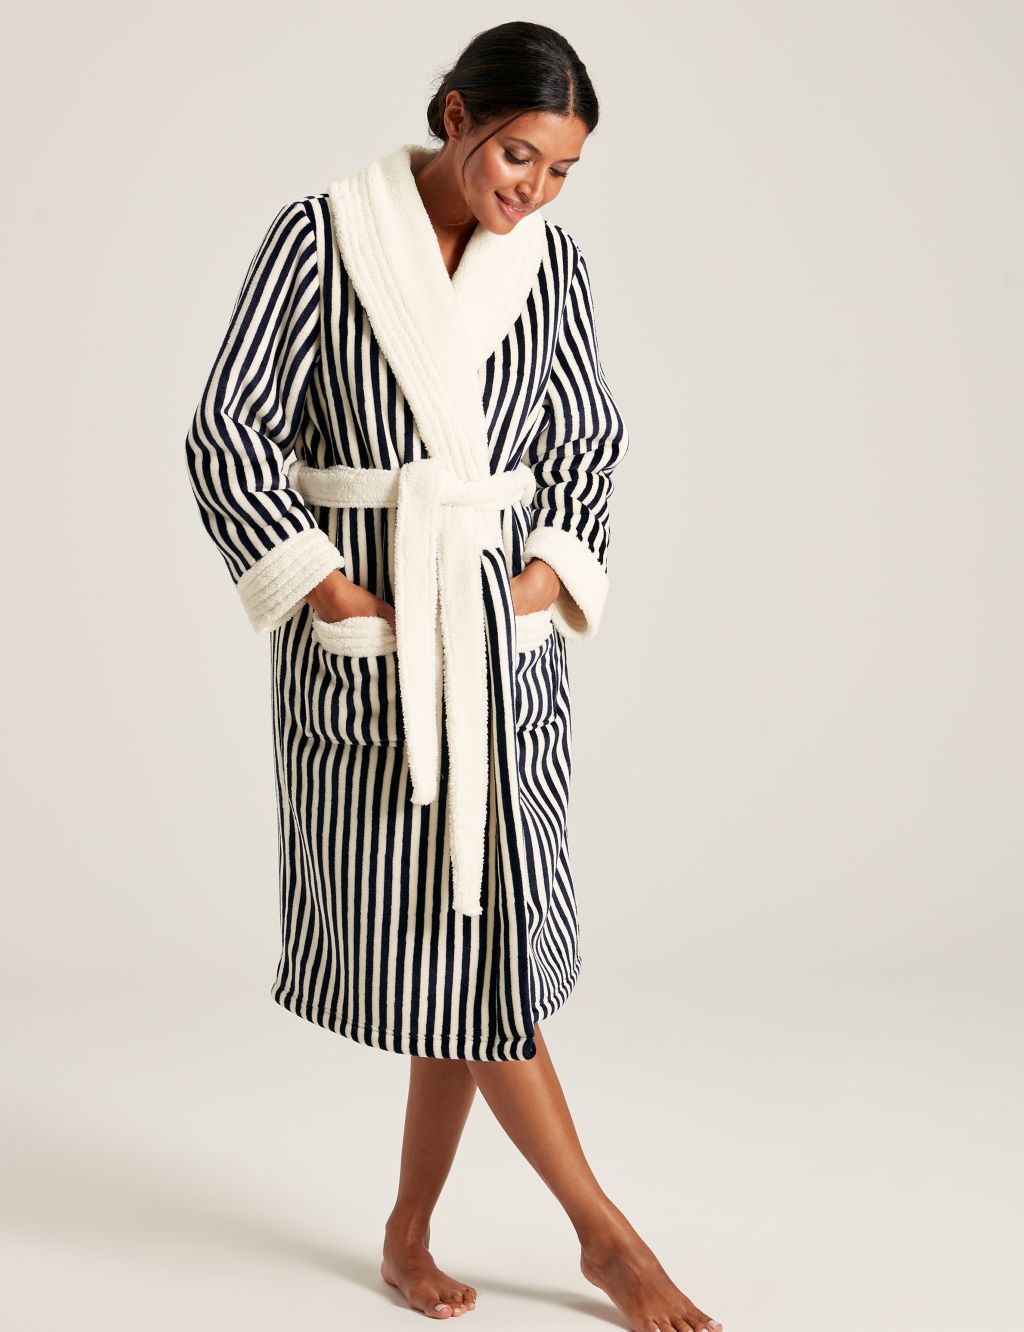 Cotton Modal Striped Dressing Gown image 1